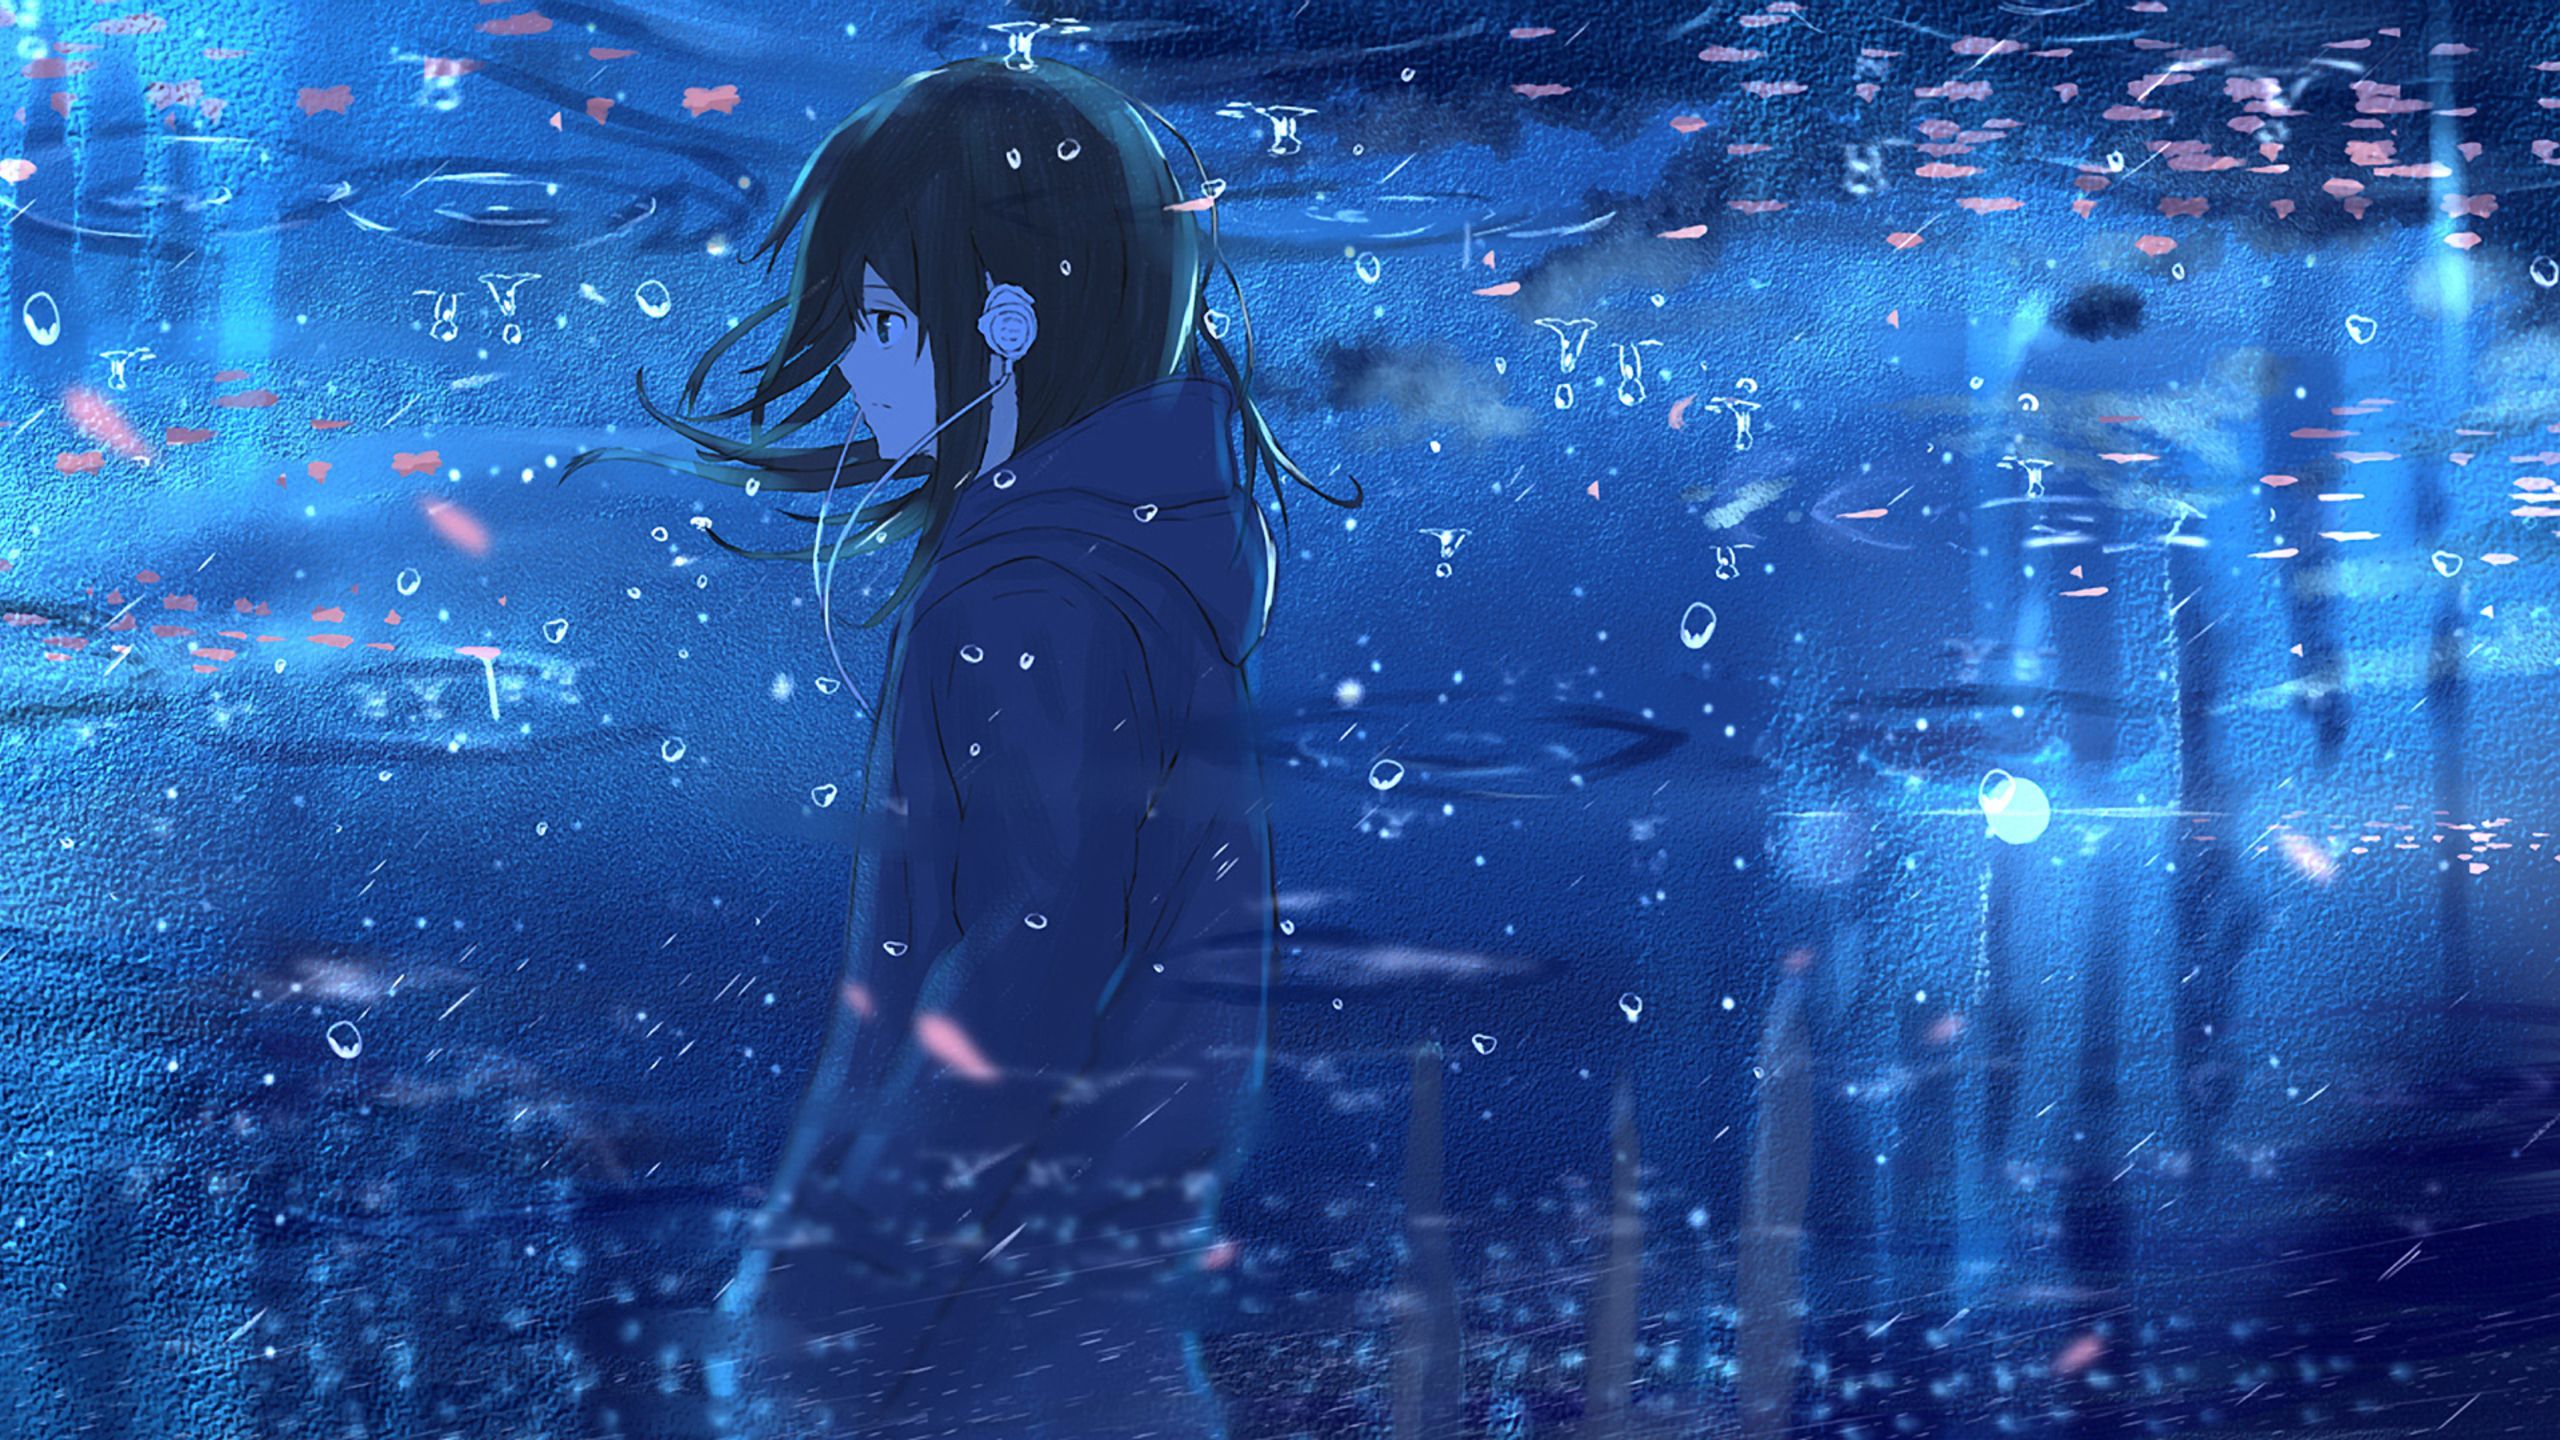 Anime 2560x1440 Wallpapers - Wallpaper Cave